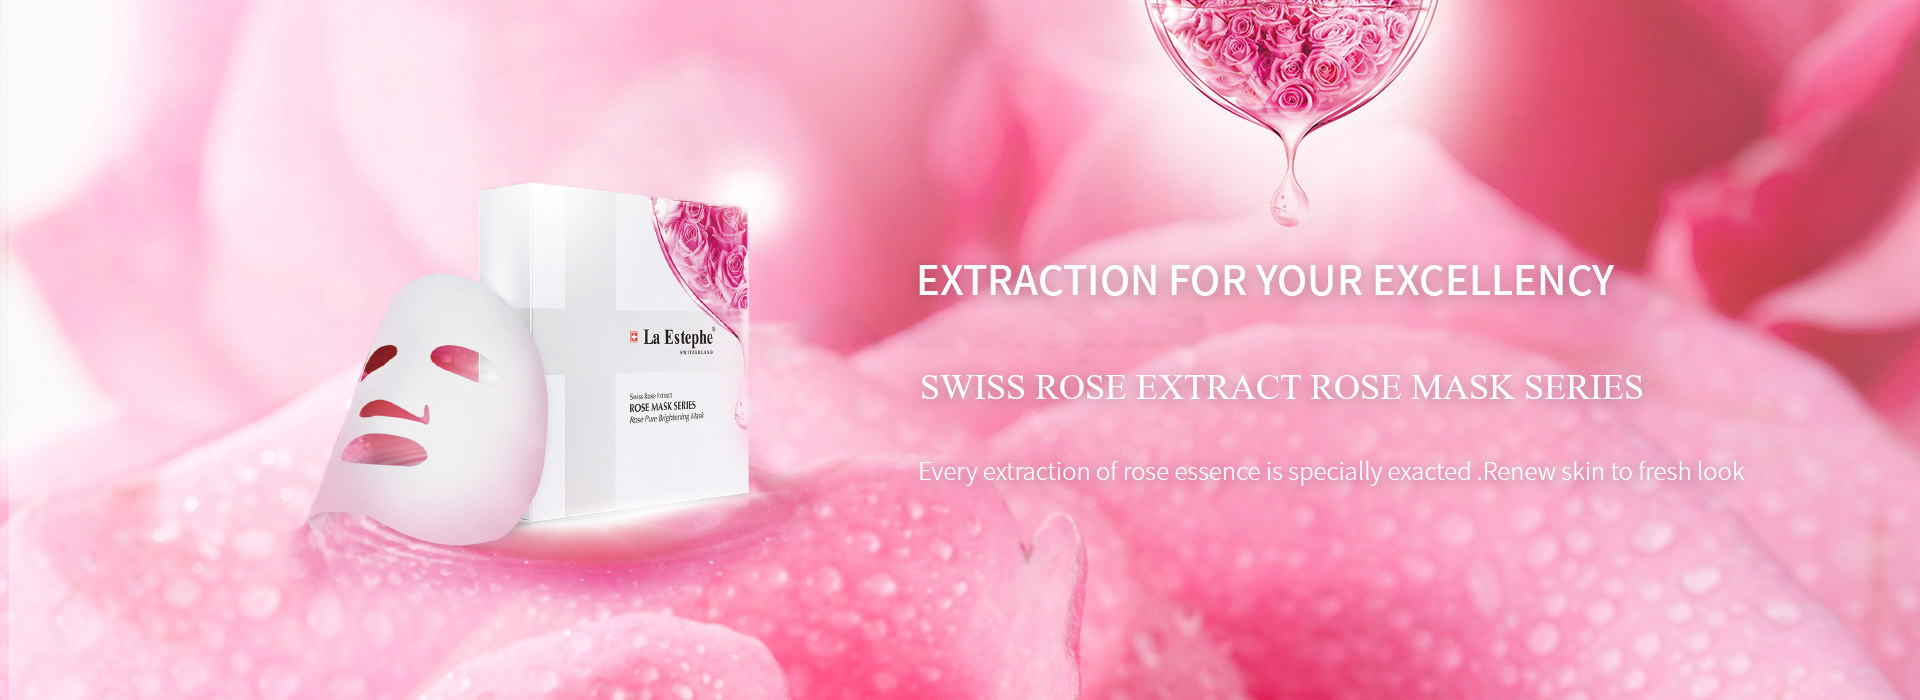 SWISS ROSE EXTRACT ROSE MASK SERIES